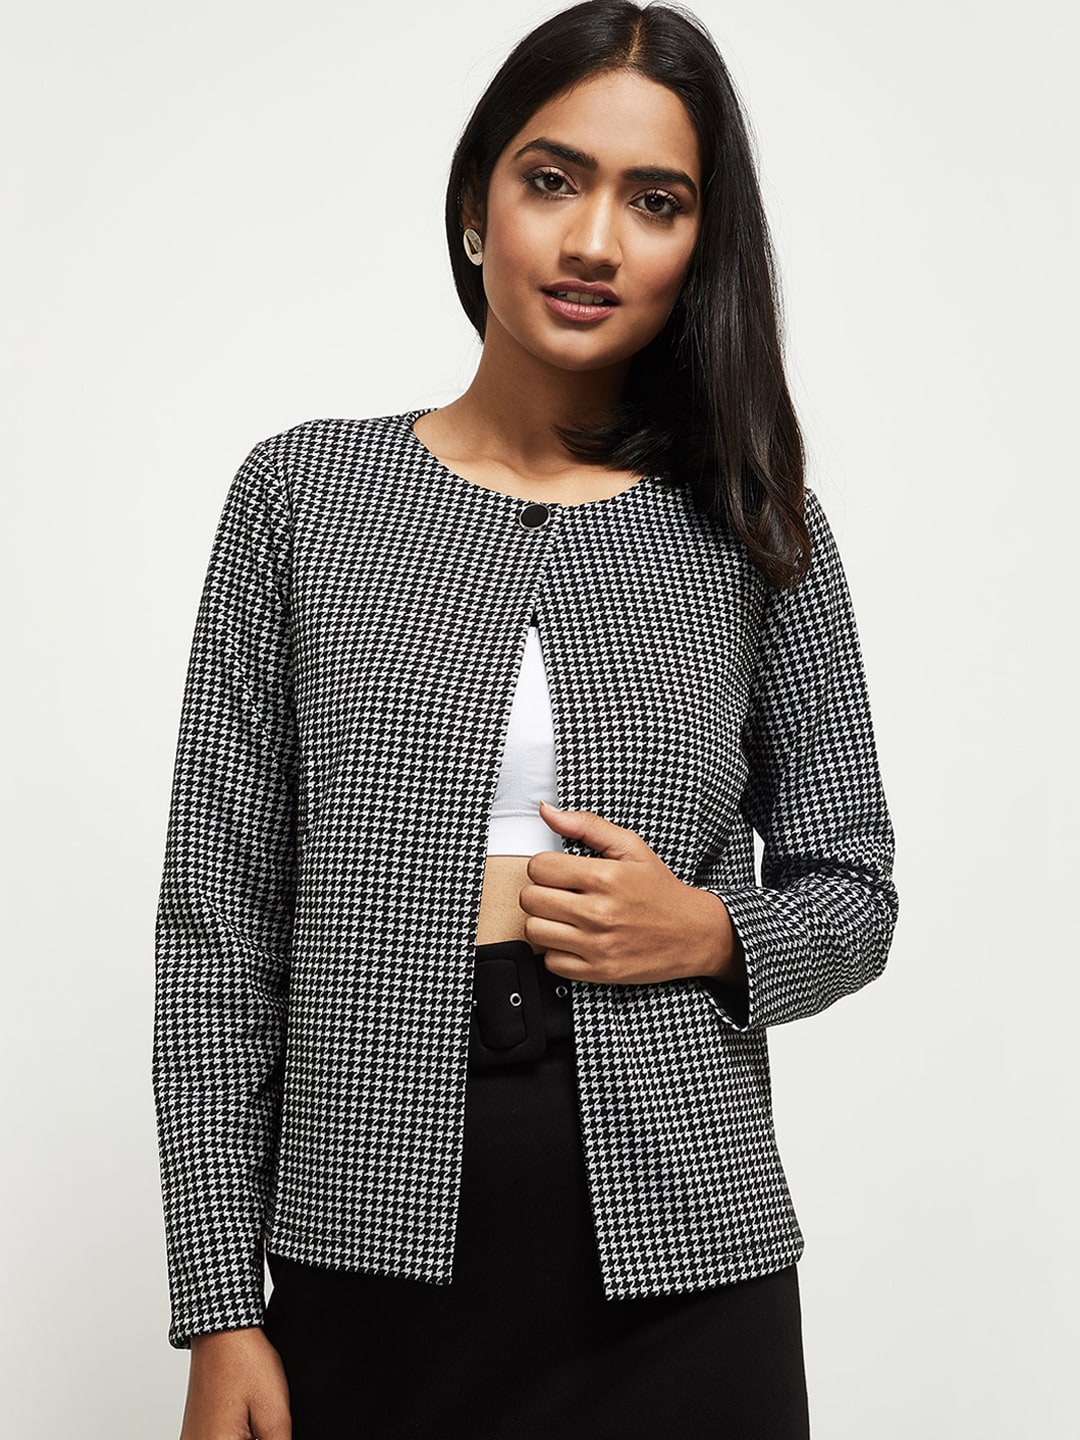 max Women White Black Checked Open Front Jacket Price in India